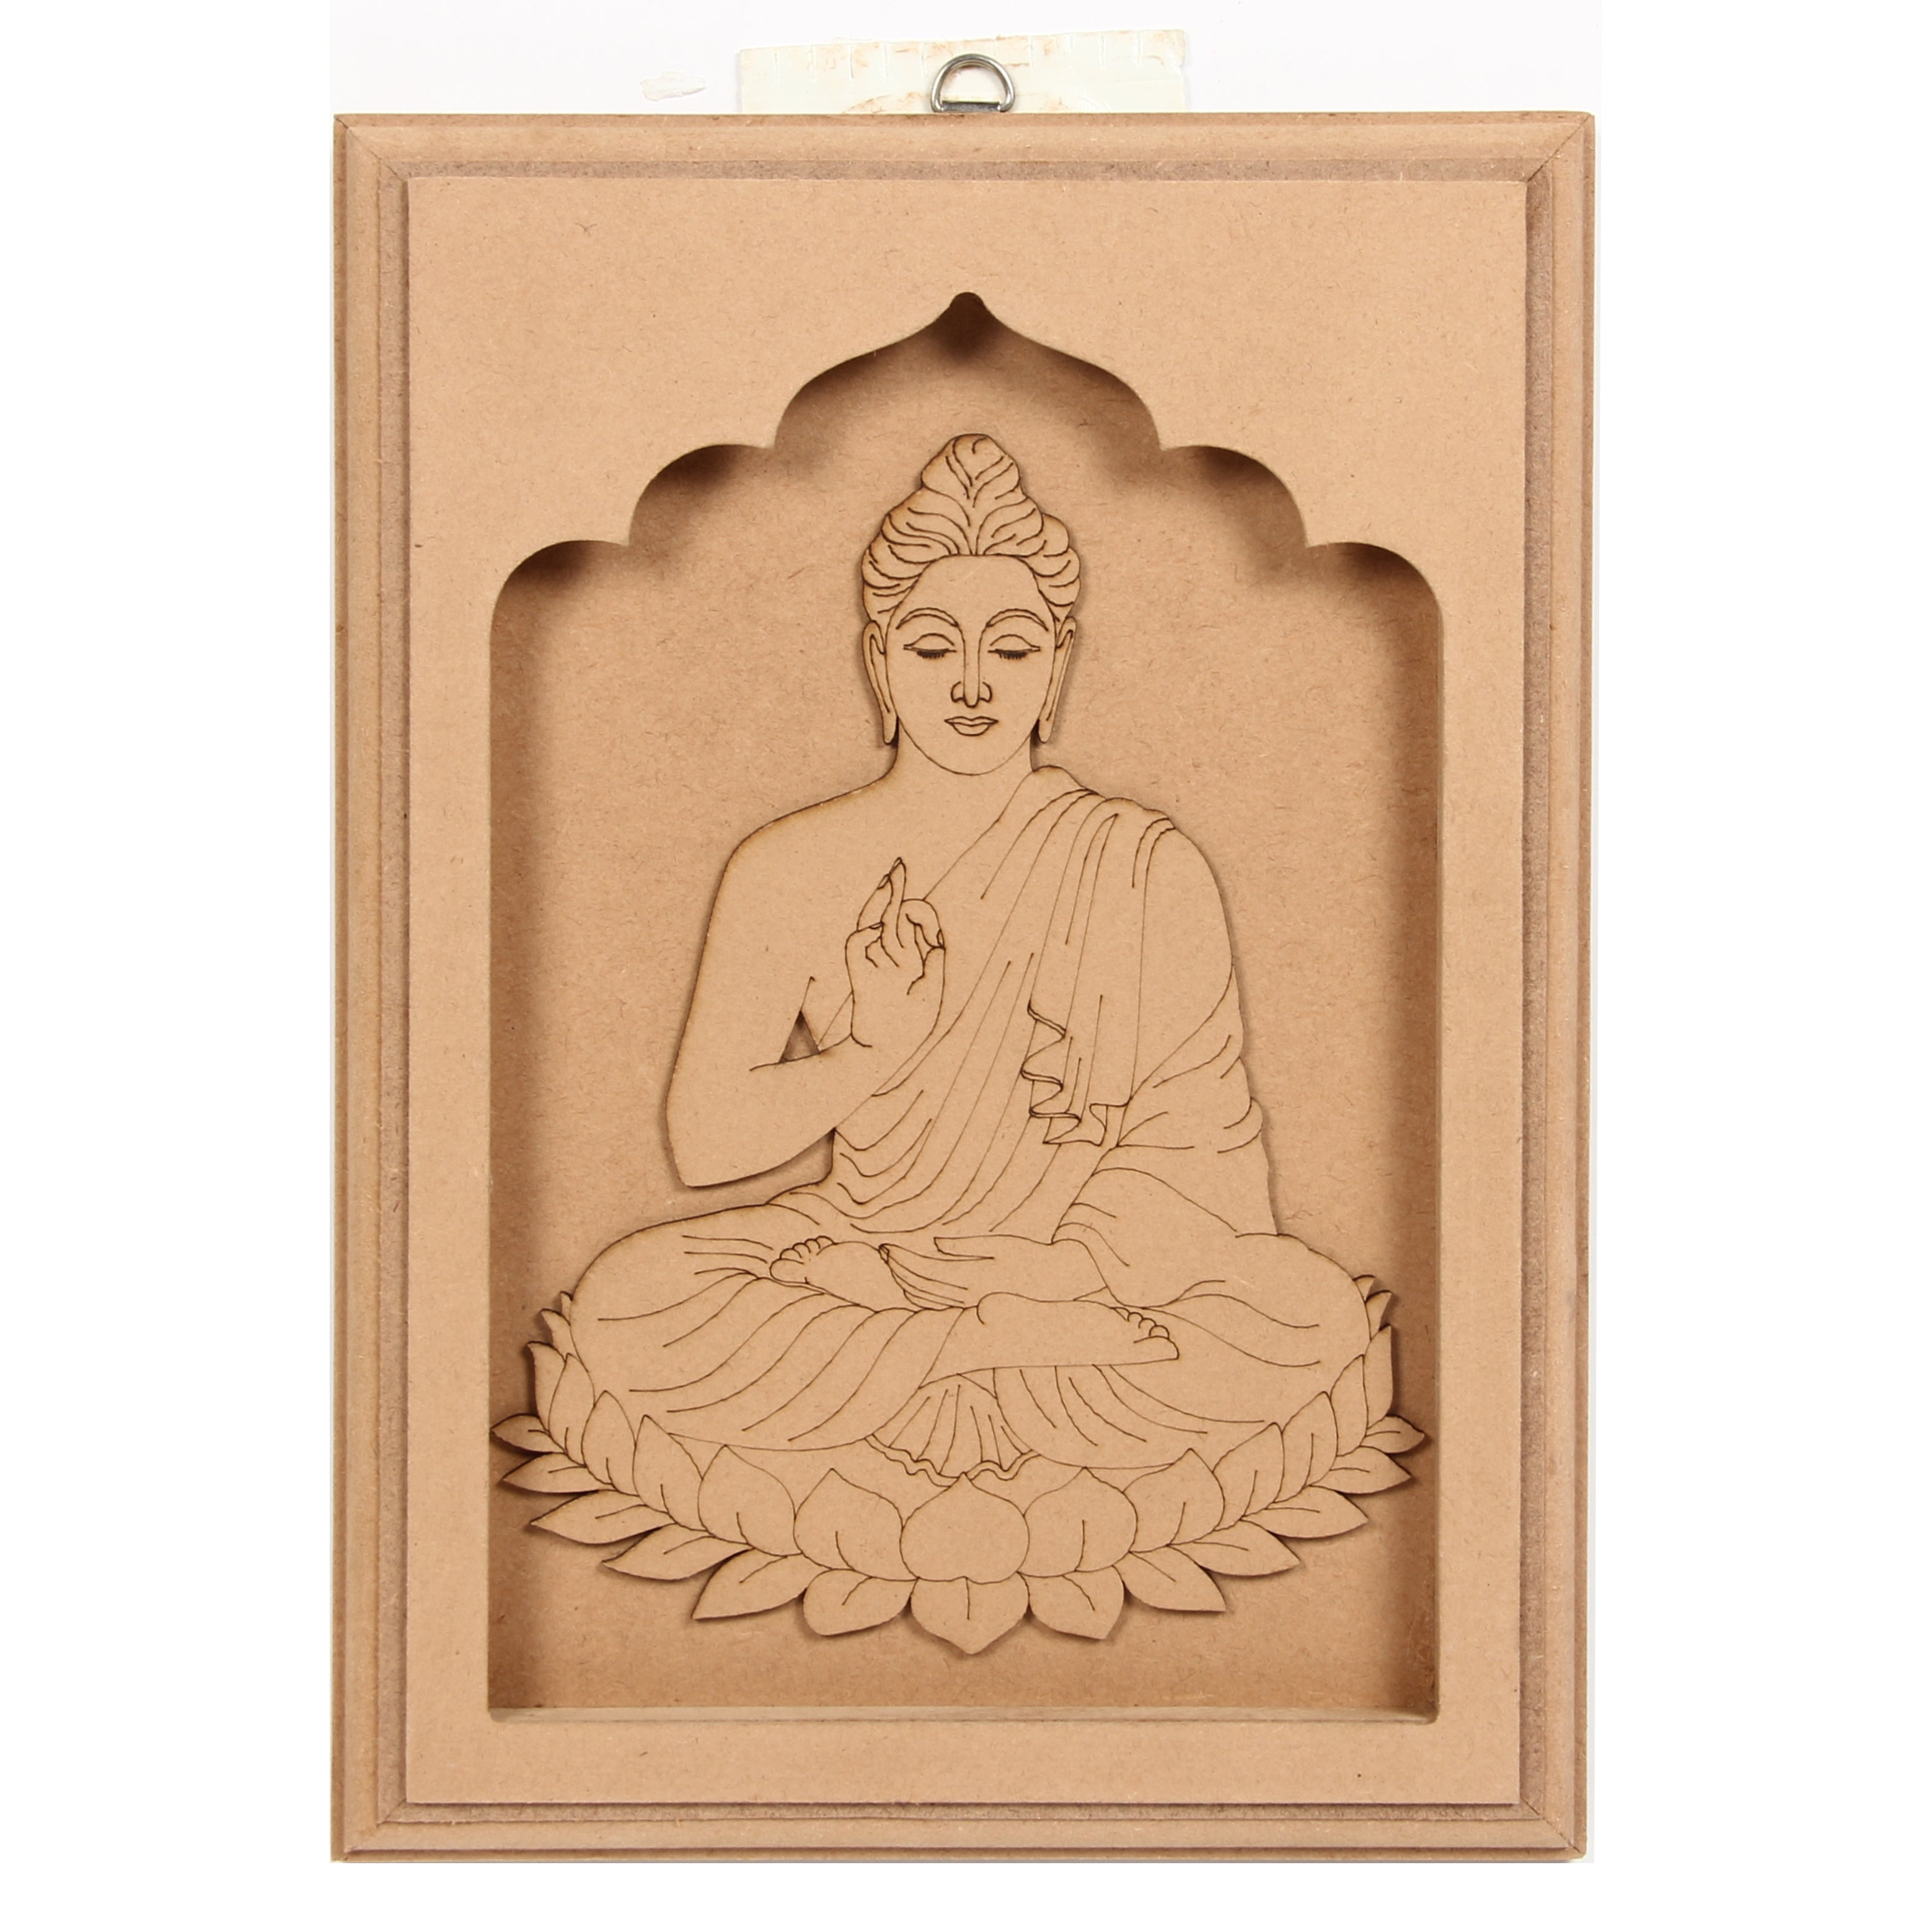 Mdf Pre Marked Buddha With D Ring Hanging Hook 12 X 8.5Inch 1Pc Lb